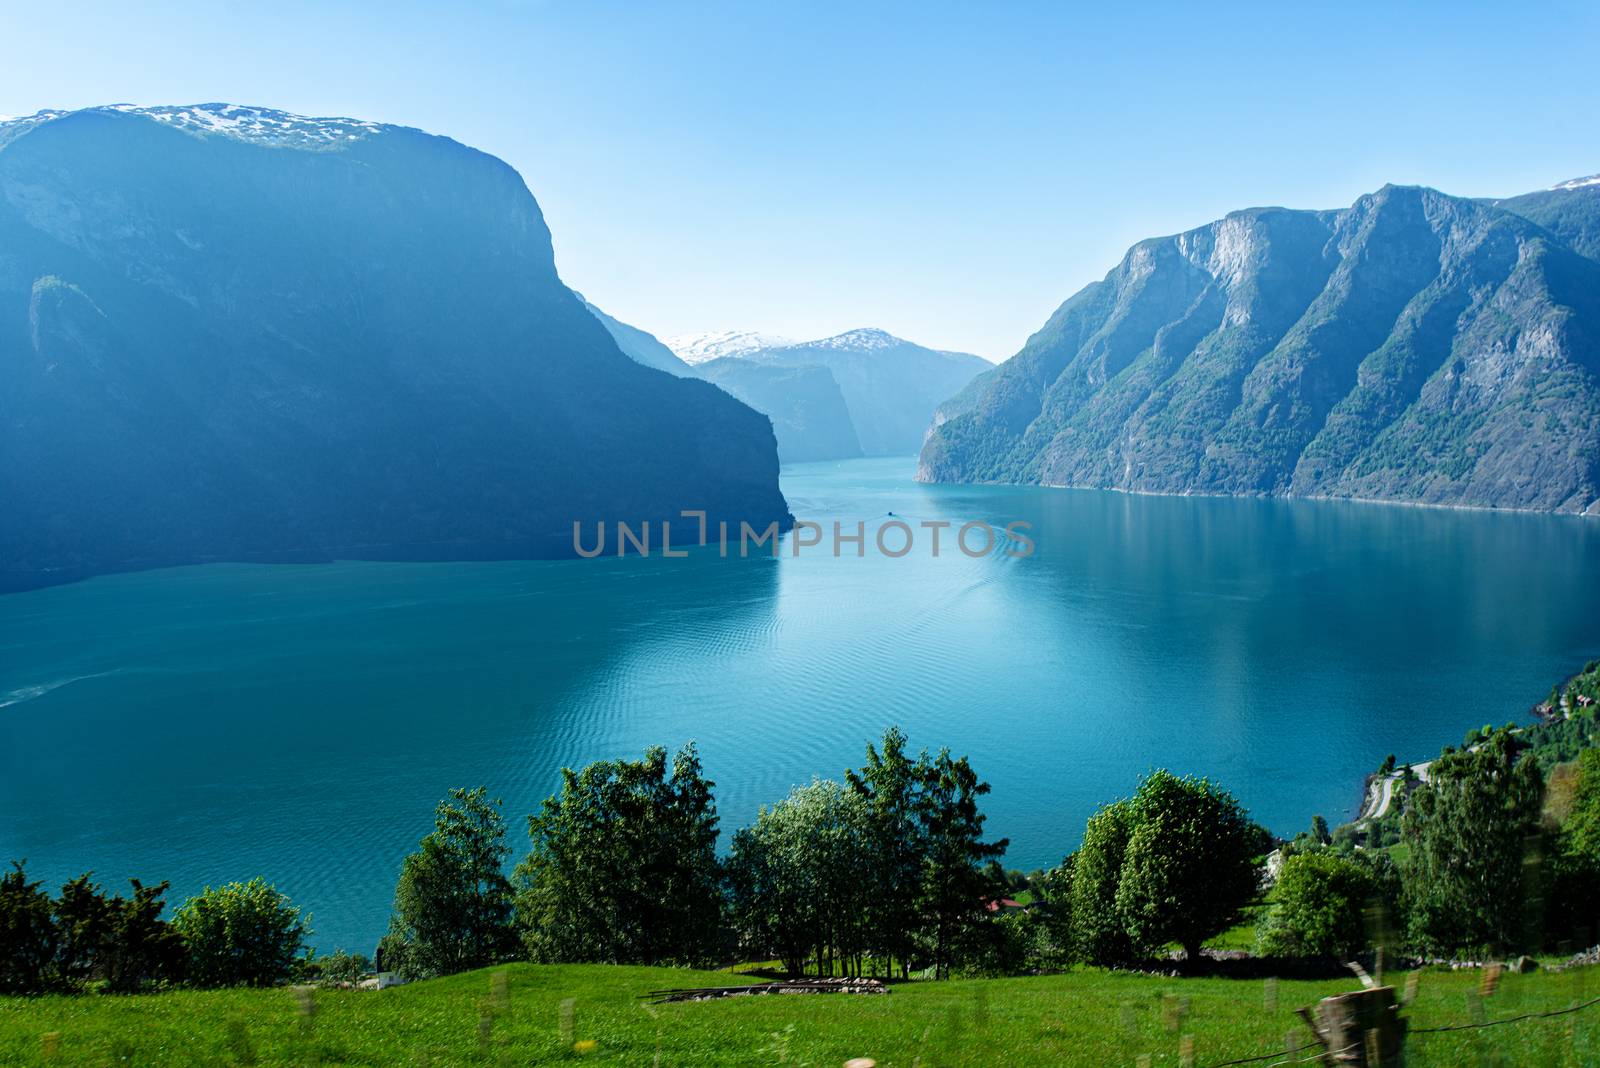 Norway Sognefjord at summer. Sunny day, landscape with mountain, fjord, forest